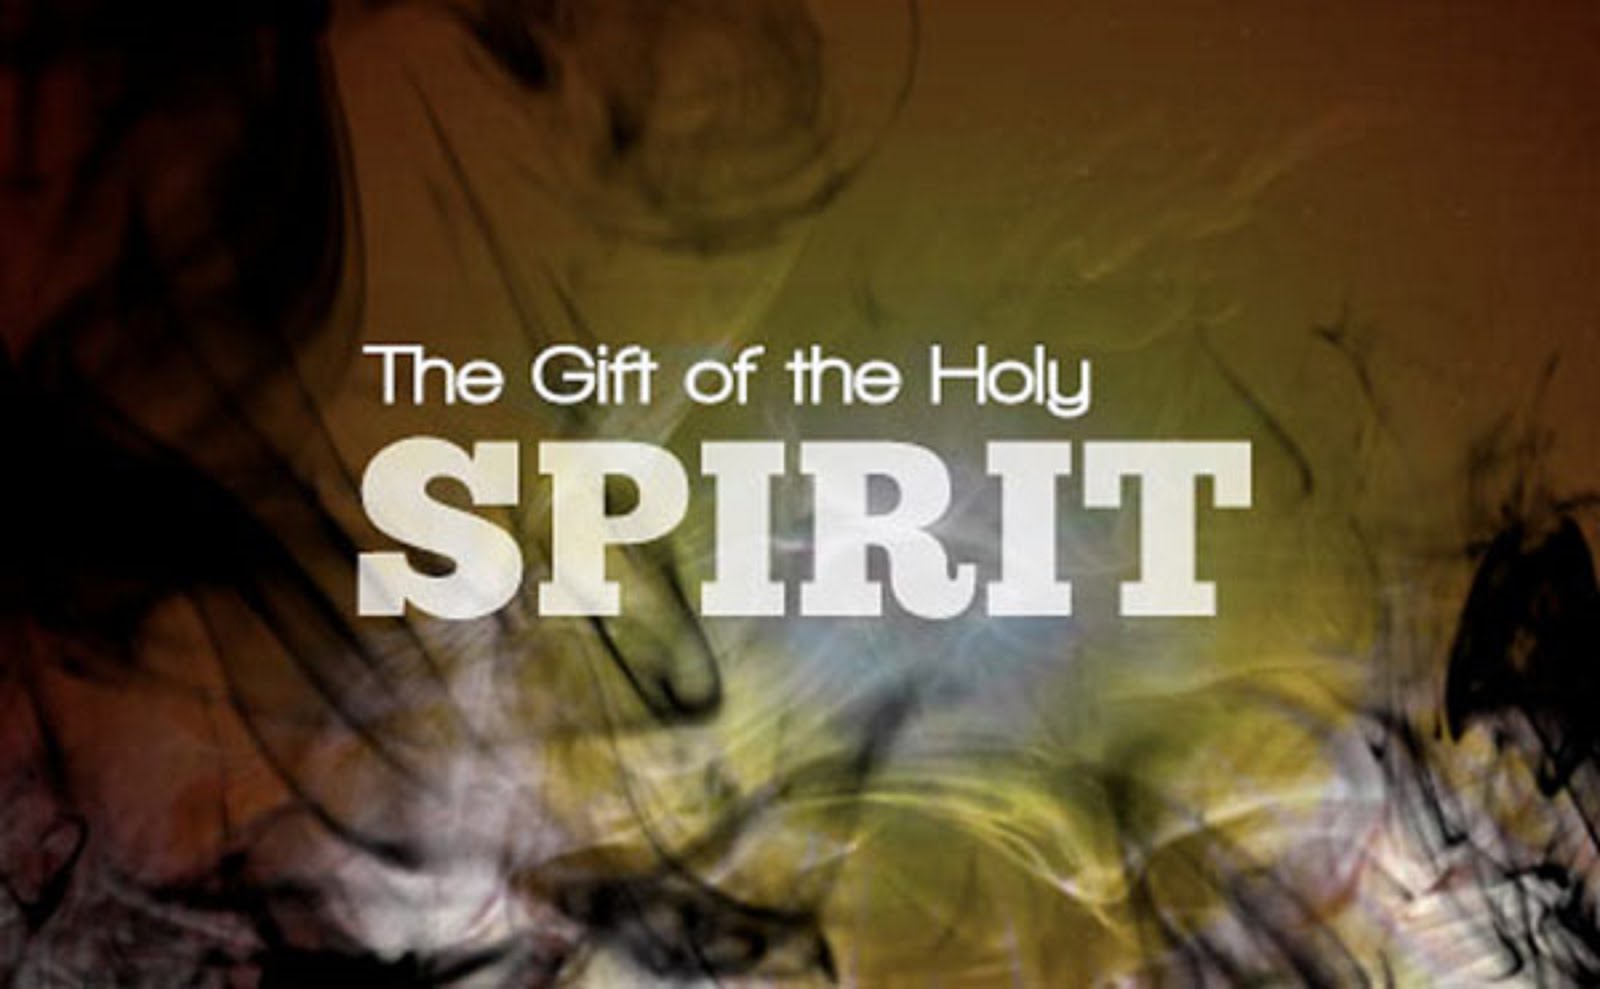 AND YOU WILL RECEIVE THE GIFT OF THE HOLY SPIRIT